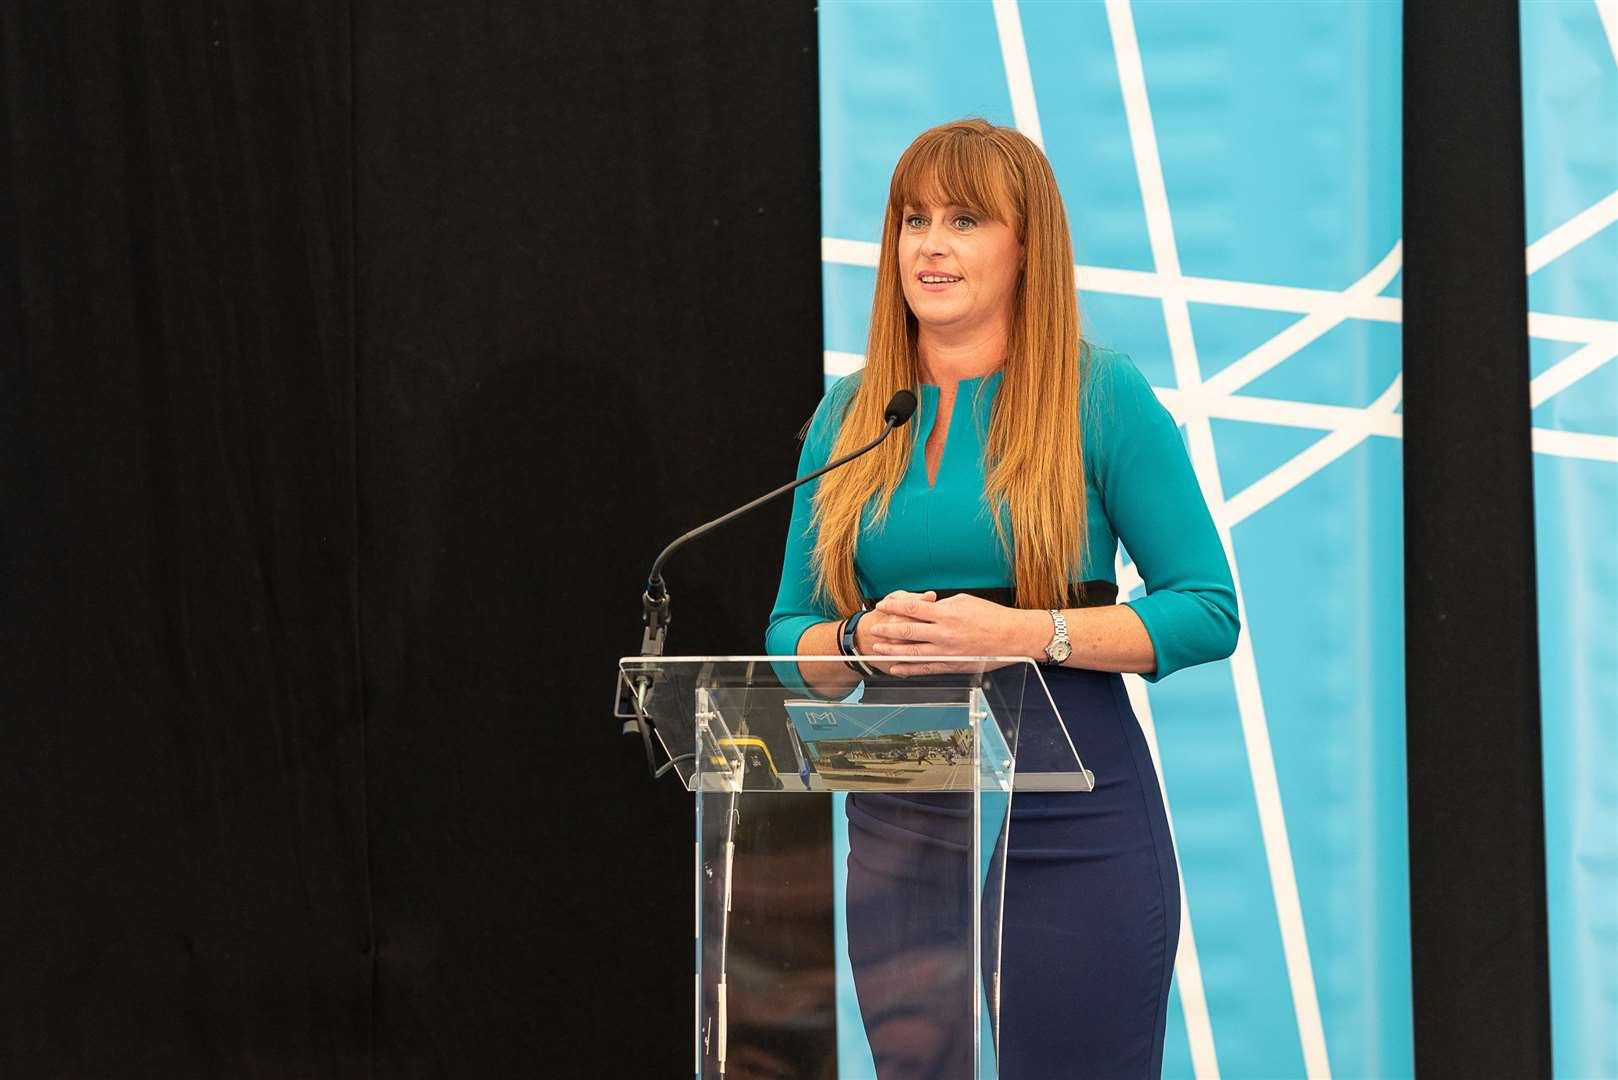 Kelly Tolhurst MP is supporting Small Business Saturday which takes place on December 1